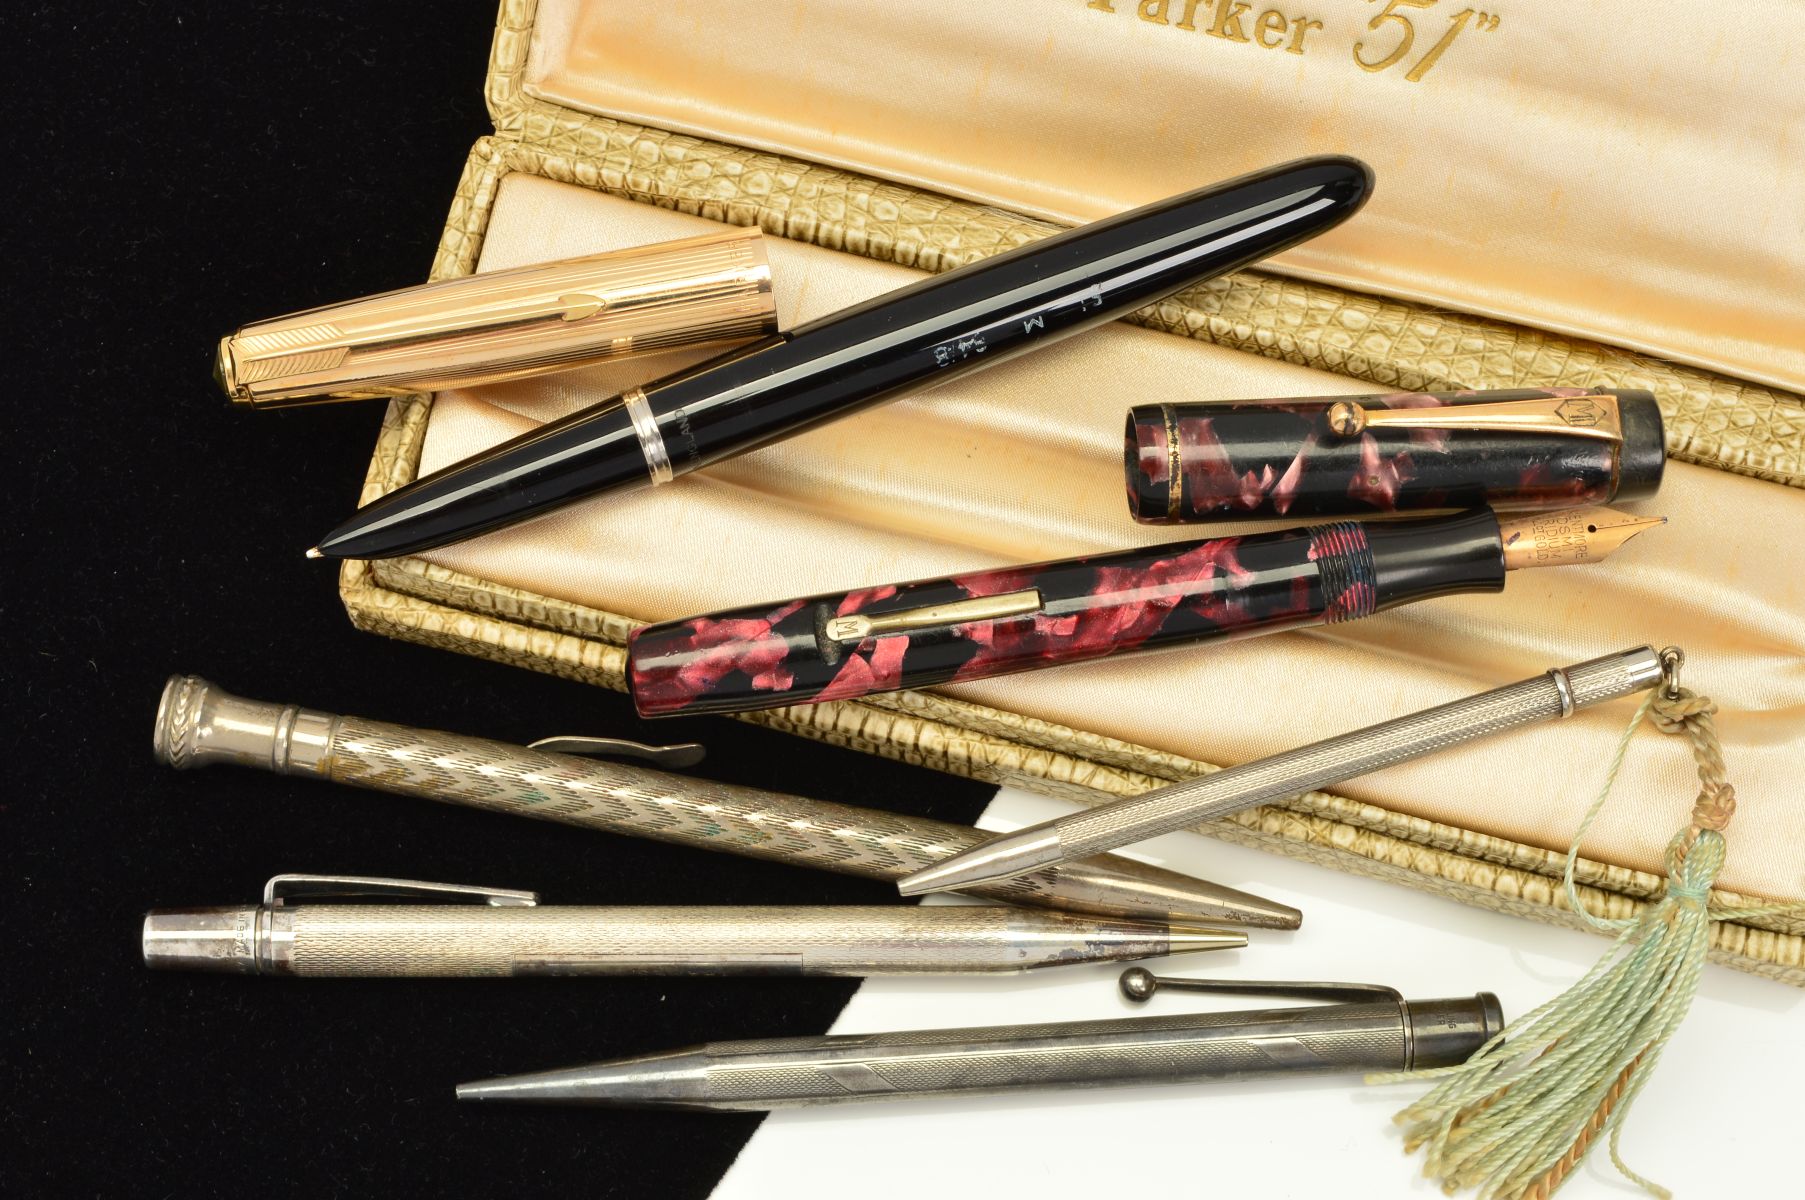 A BOXED PARKER '51' FOUNTAIN PEN, together with a vintage Mentimore Auto Flow red/black marble